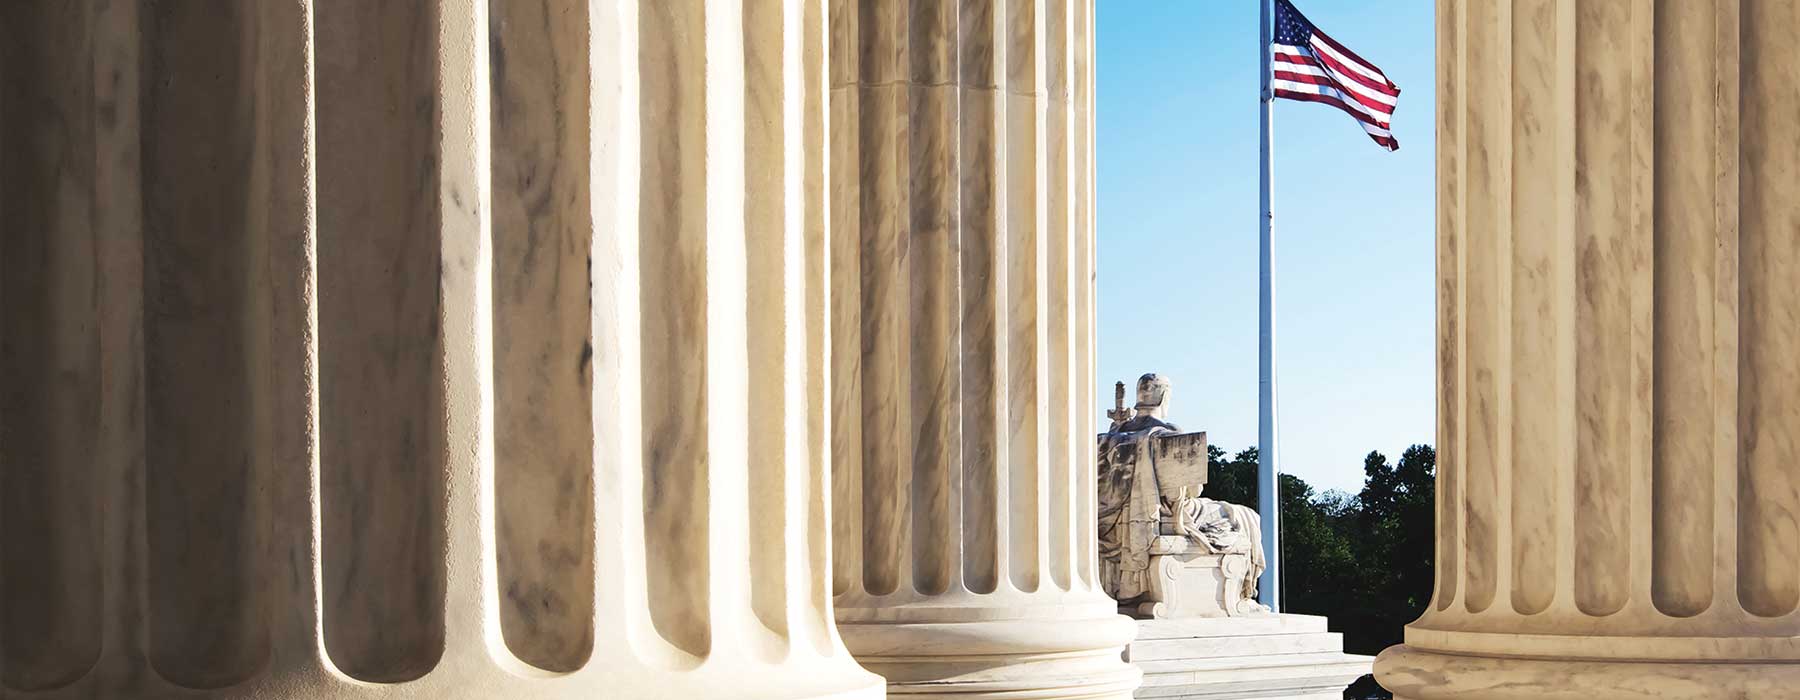 detail of columns at the U.S. Supreme Court